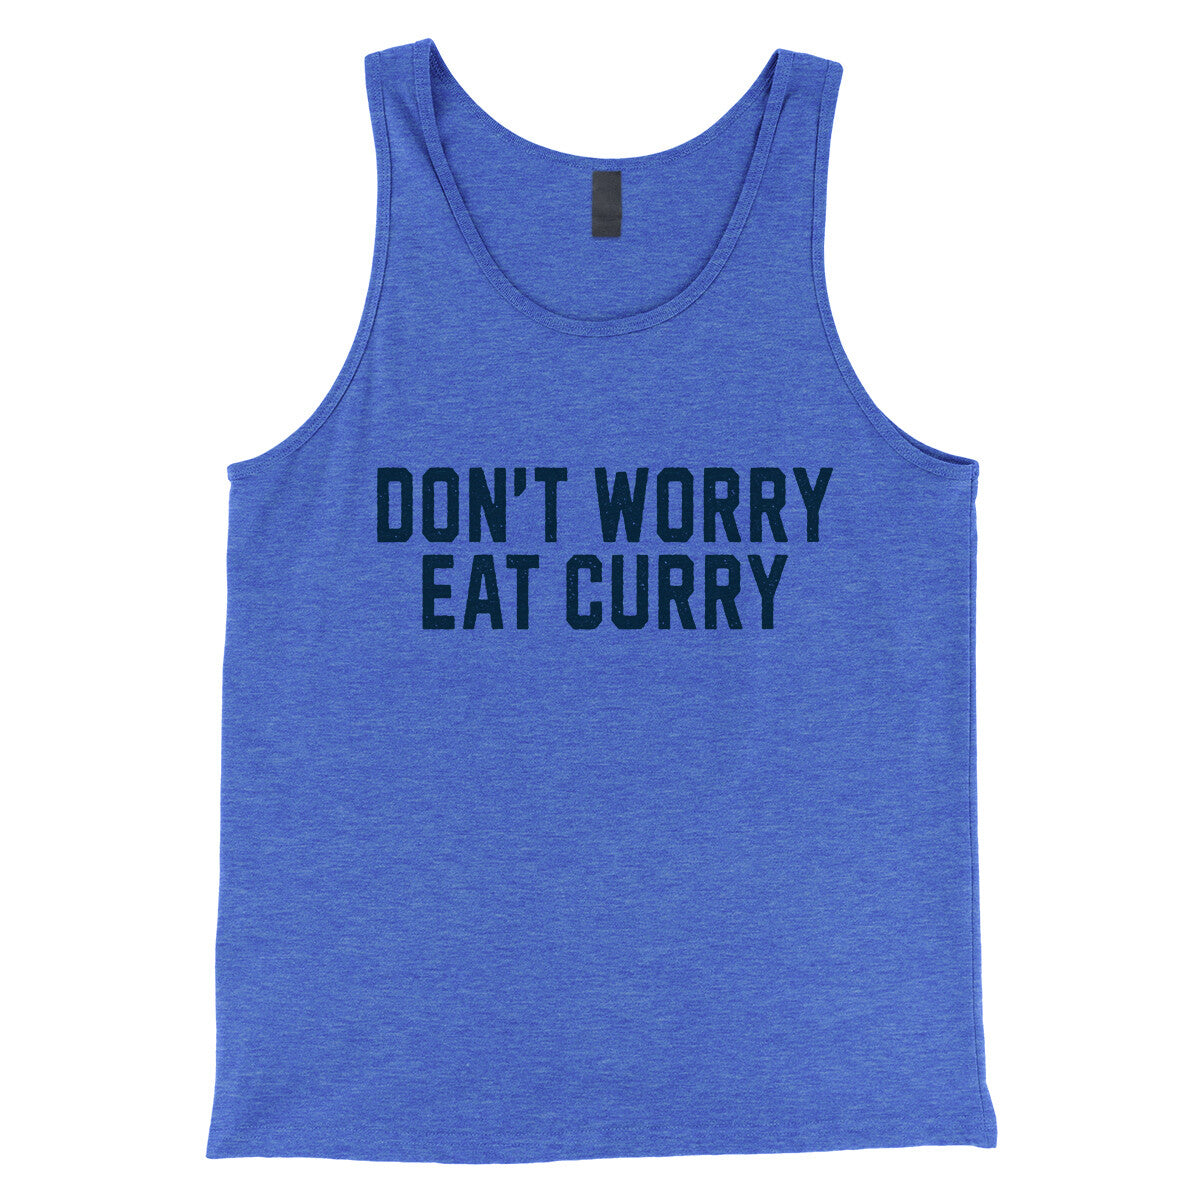 Don't Worry Eat Curry in True Royal TriBlend Color